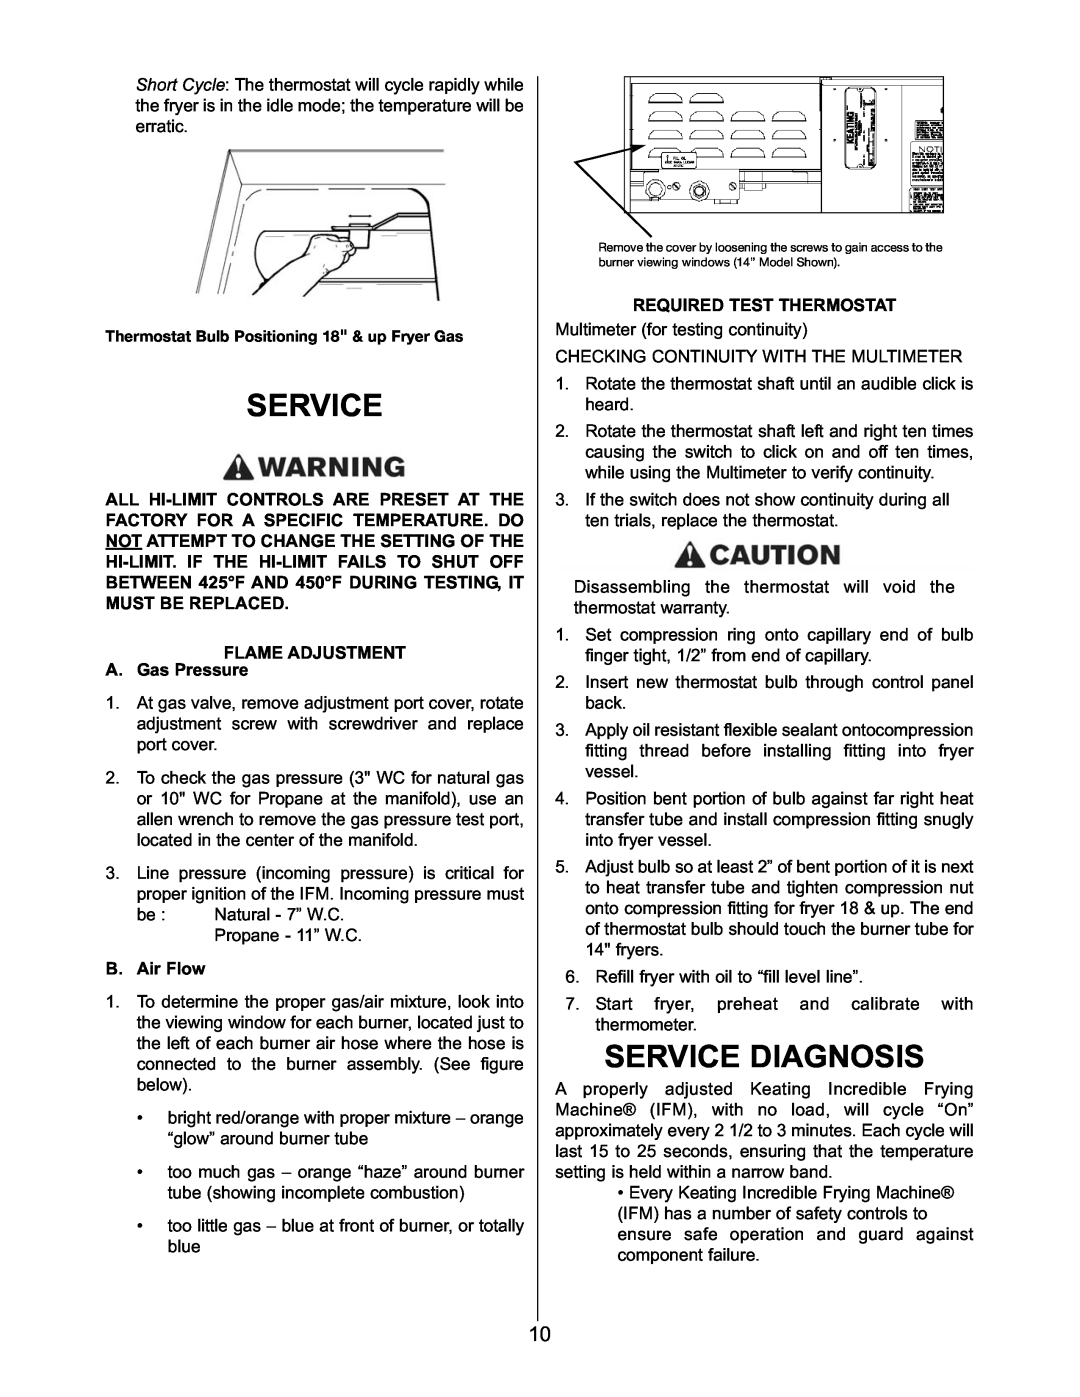 Keating Of Chicago 2006 Service Diagnosis, FLAME ADJUSTMENT A. Gas Pressure, B. Air Flow, Required Test Thermostat 